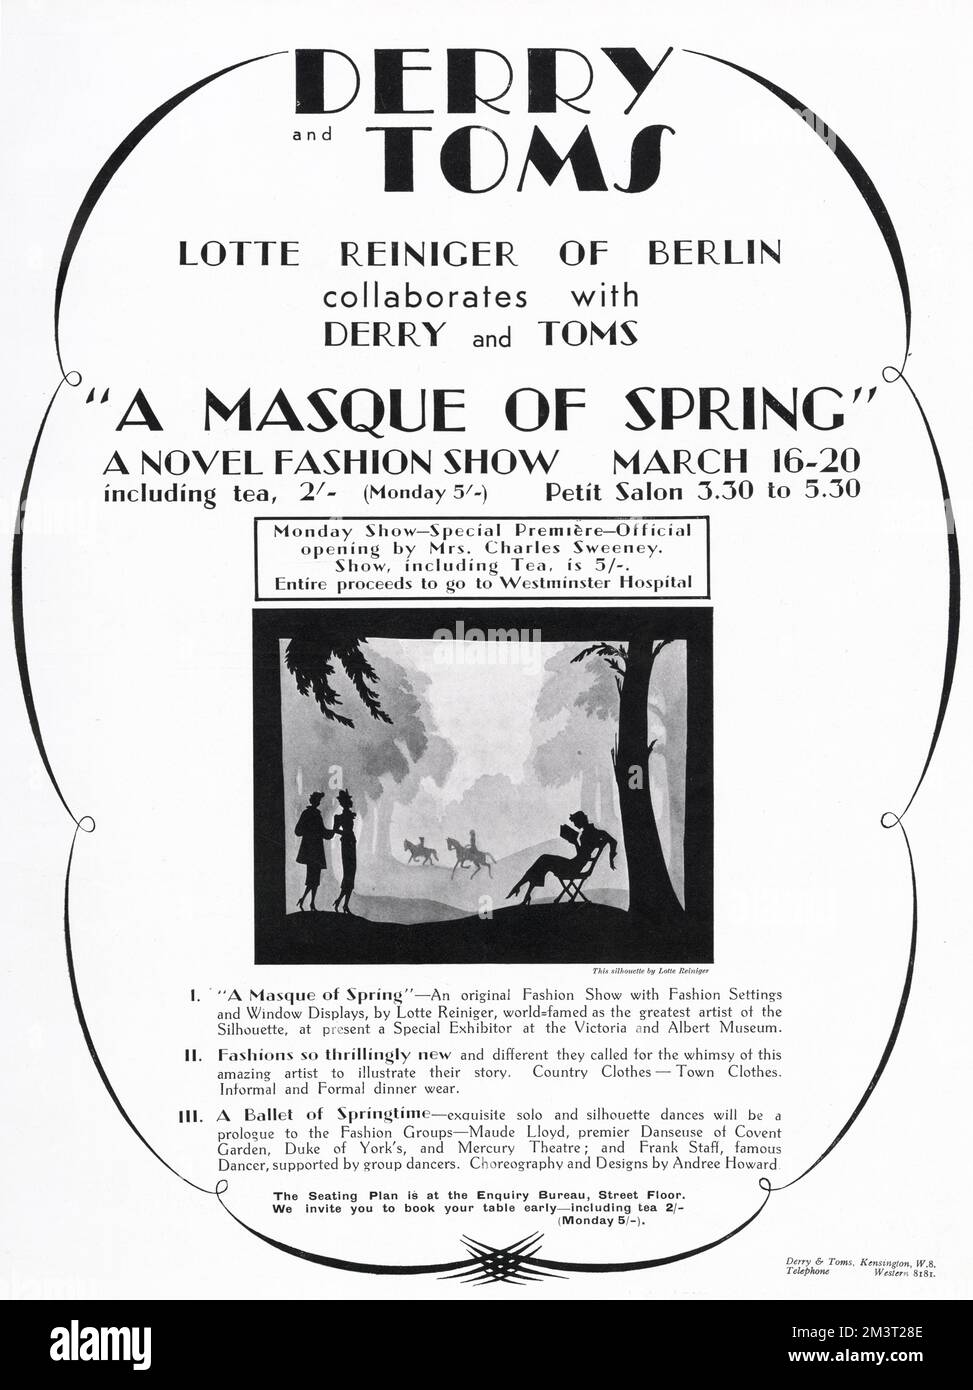 Advertisement for a spring fashion event at the London department store, Derry and Toms, with a novel attraction being the fashion settings and window displays designed by the celebrated German silhouette artist, Lotte Reiniger. Stock Photo